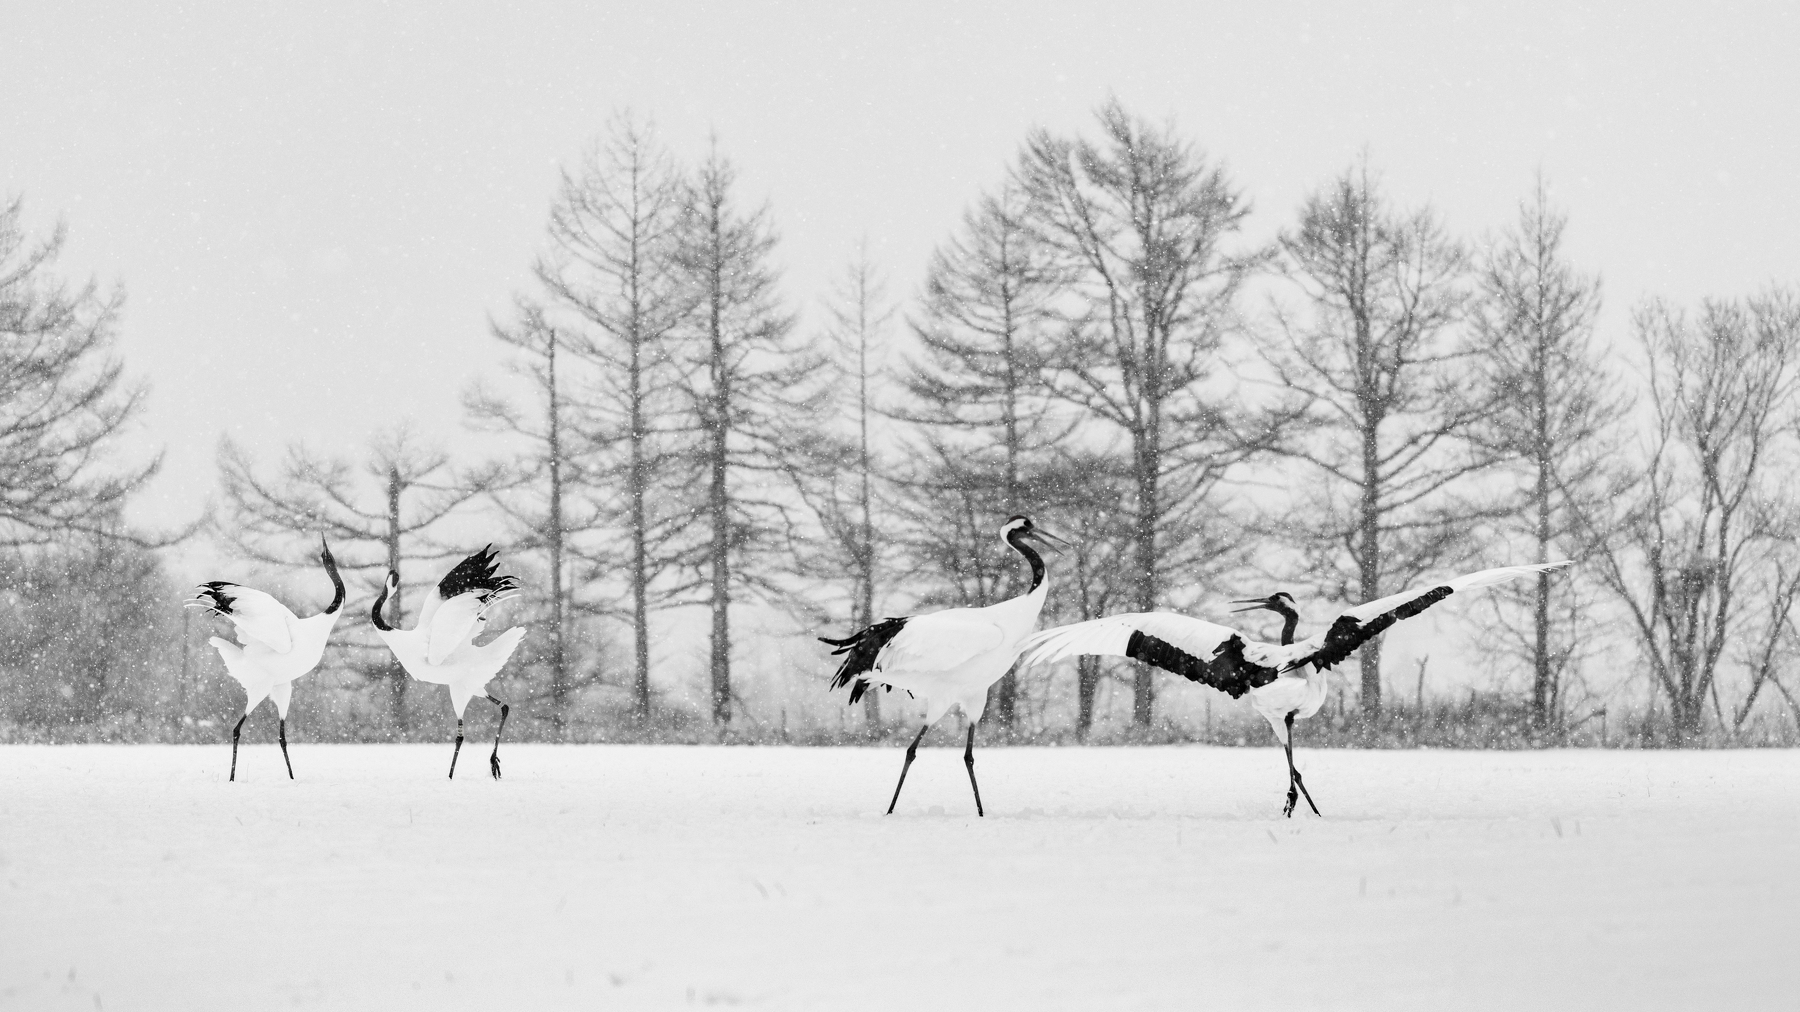 Red-crowned crane couples dancing